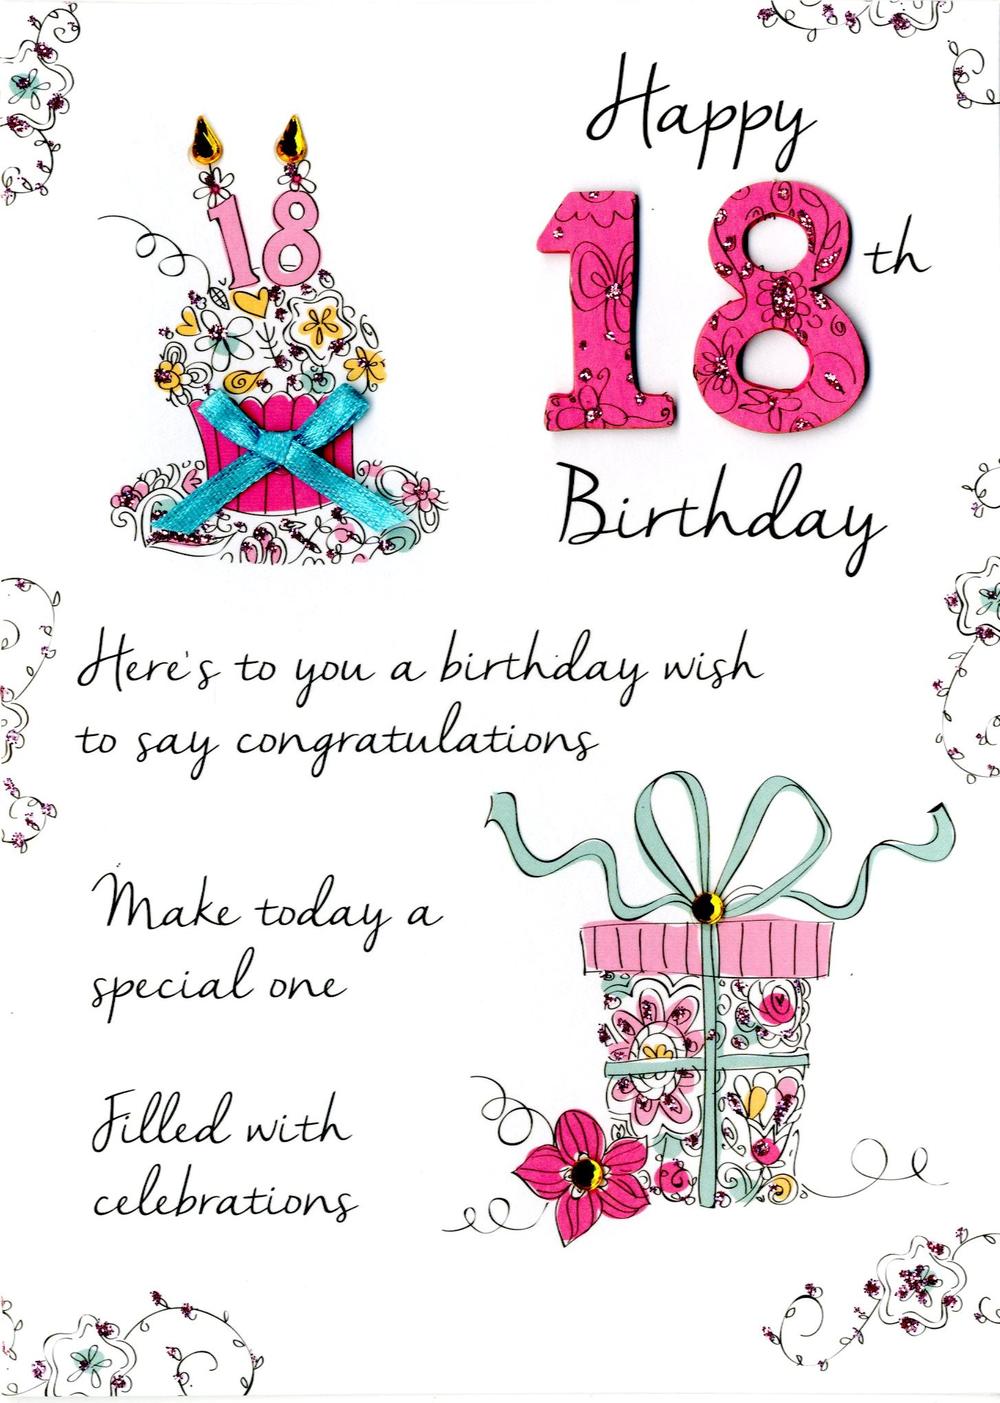 Happy 18th Birthday Wishes for Friend, Daughter, Sister, Son Image ...